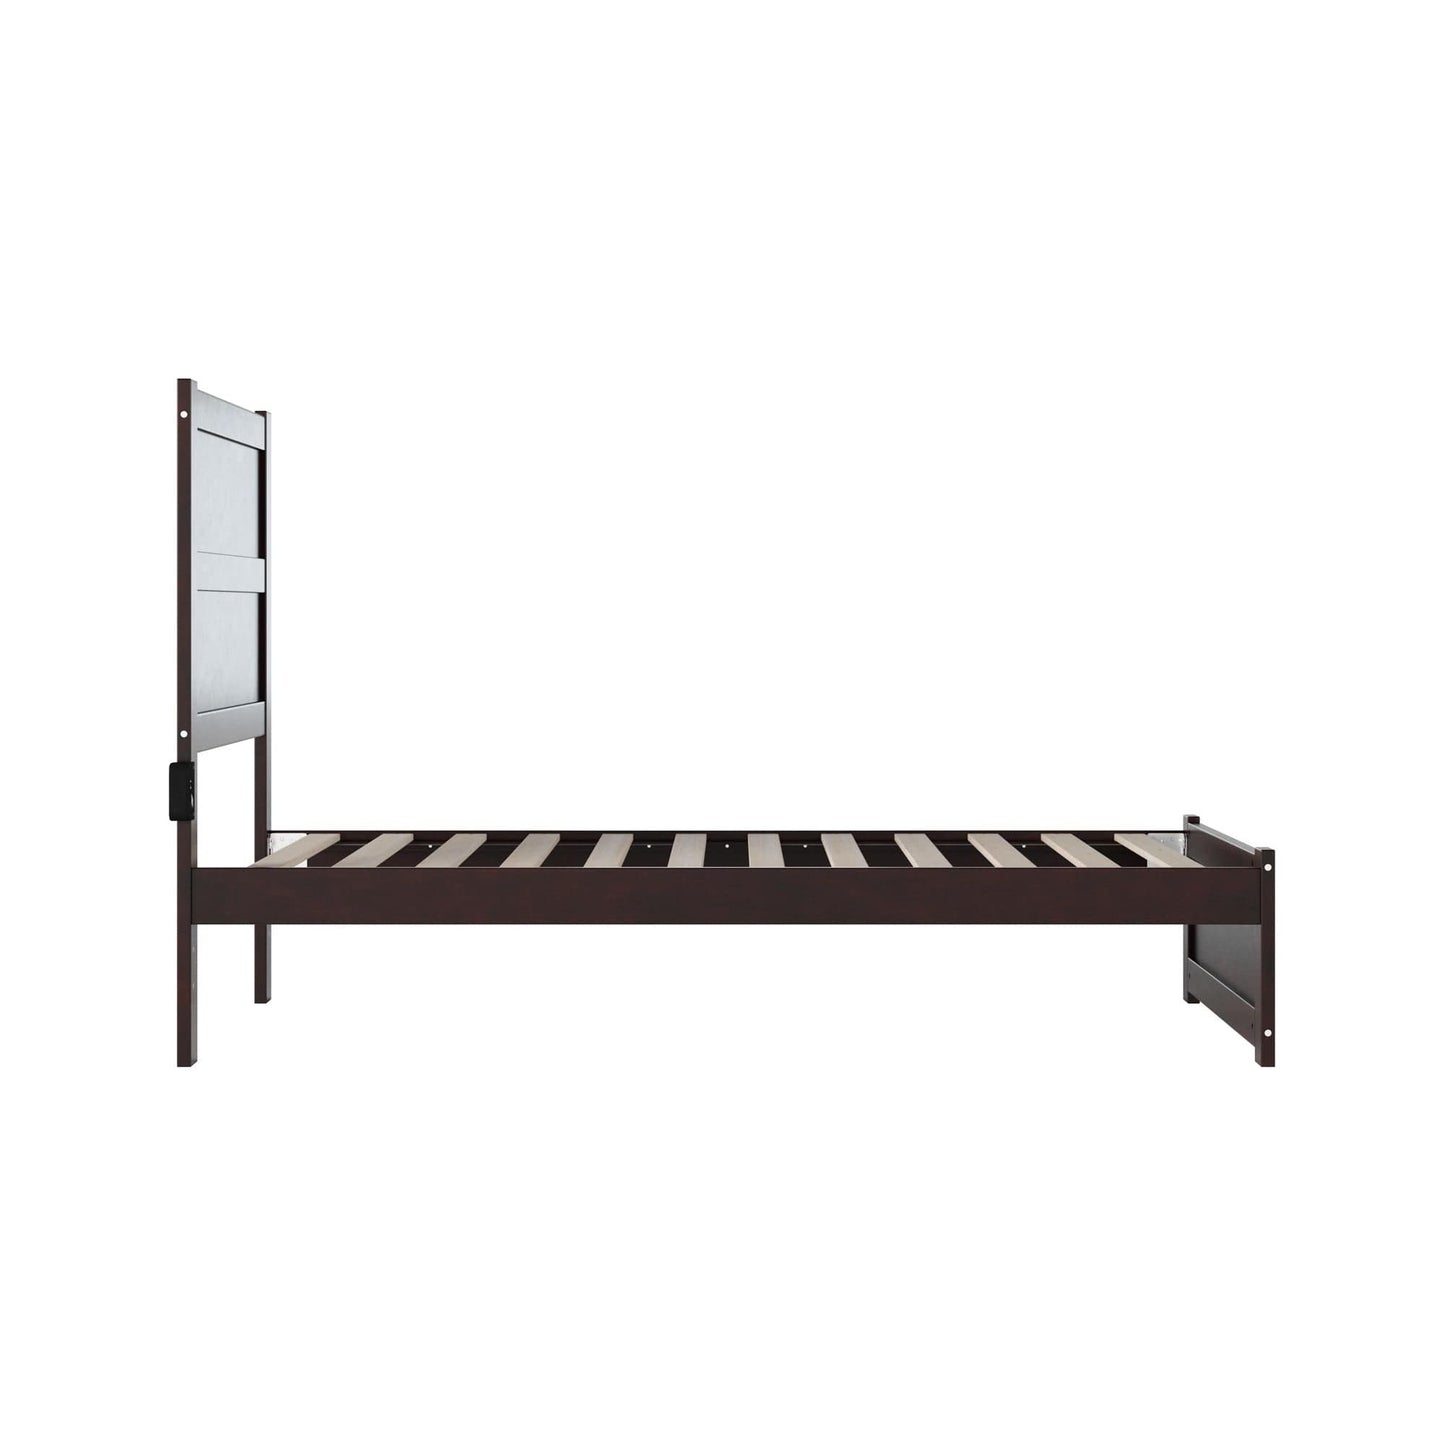 AFI Furnishings NoHo Twin Bed with Footboard in Espresso AG9160021